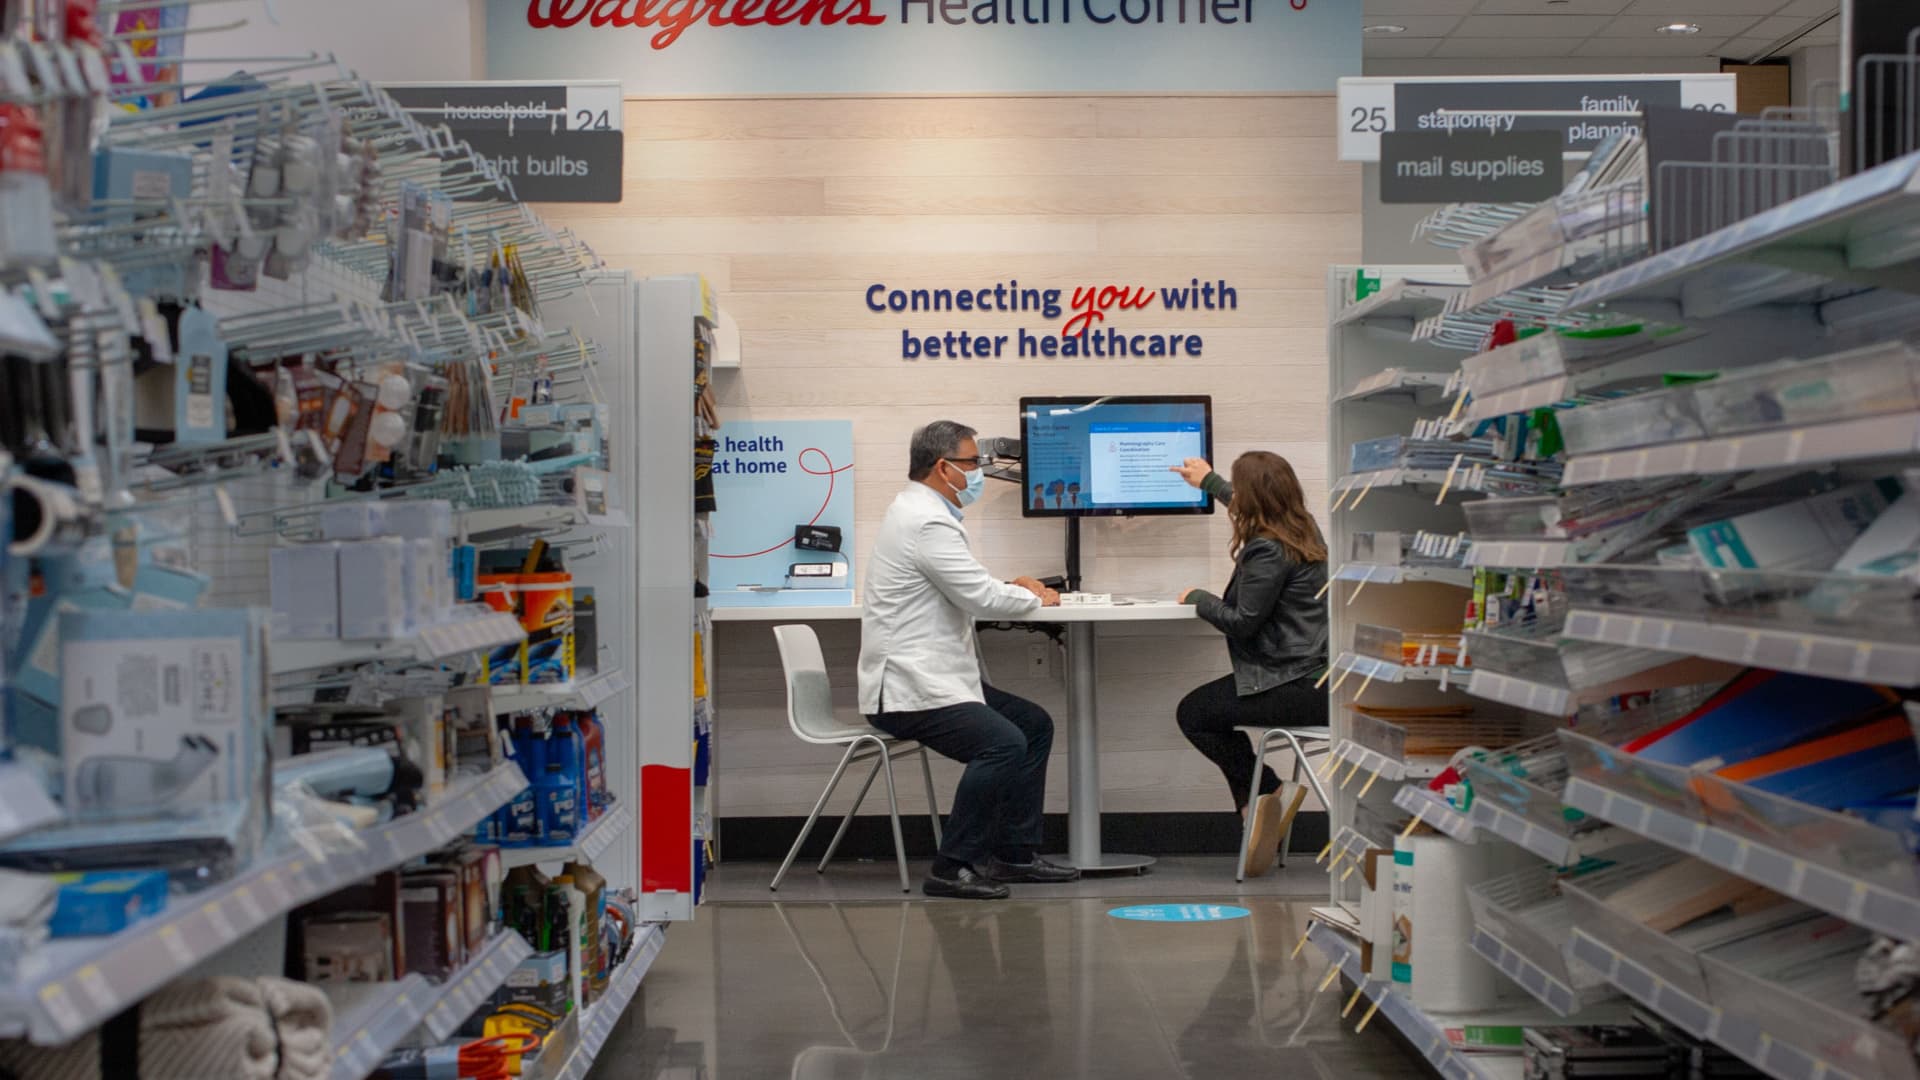 Walgreens expands medical-care offerings in major California markets